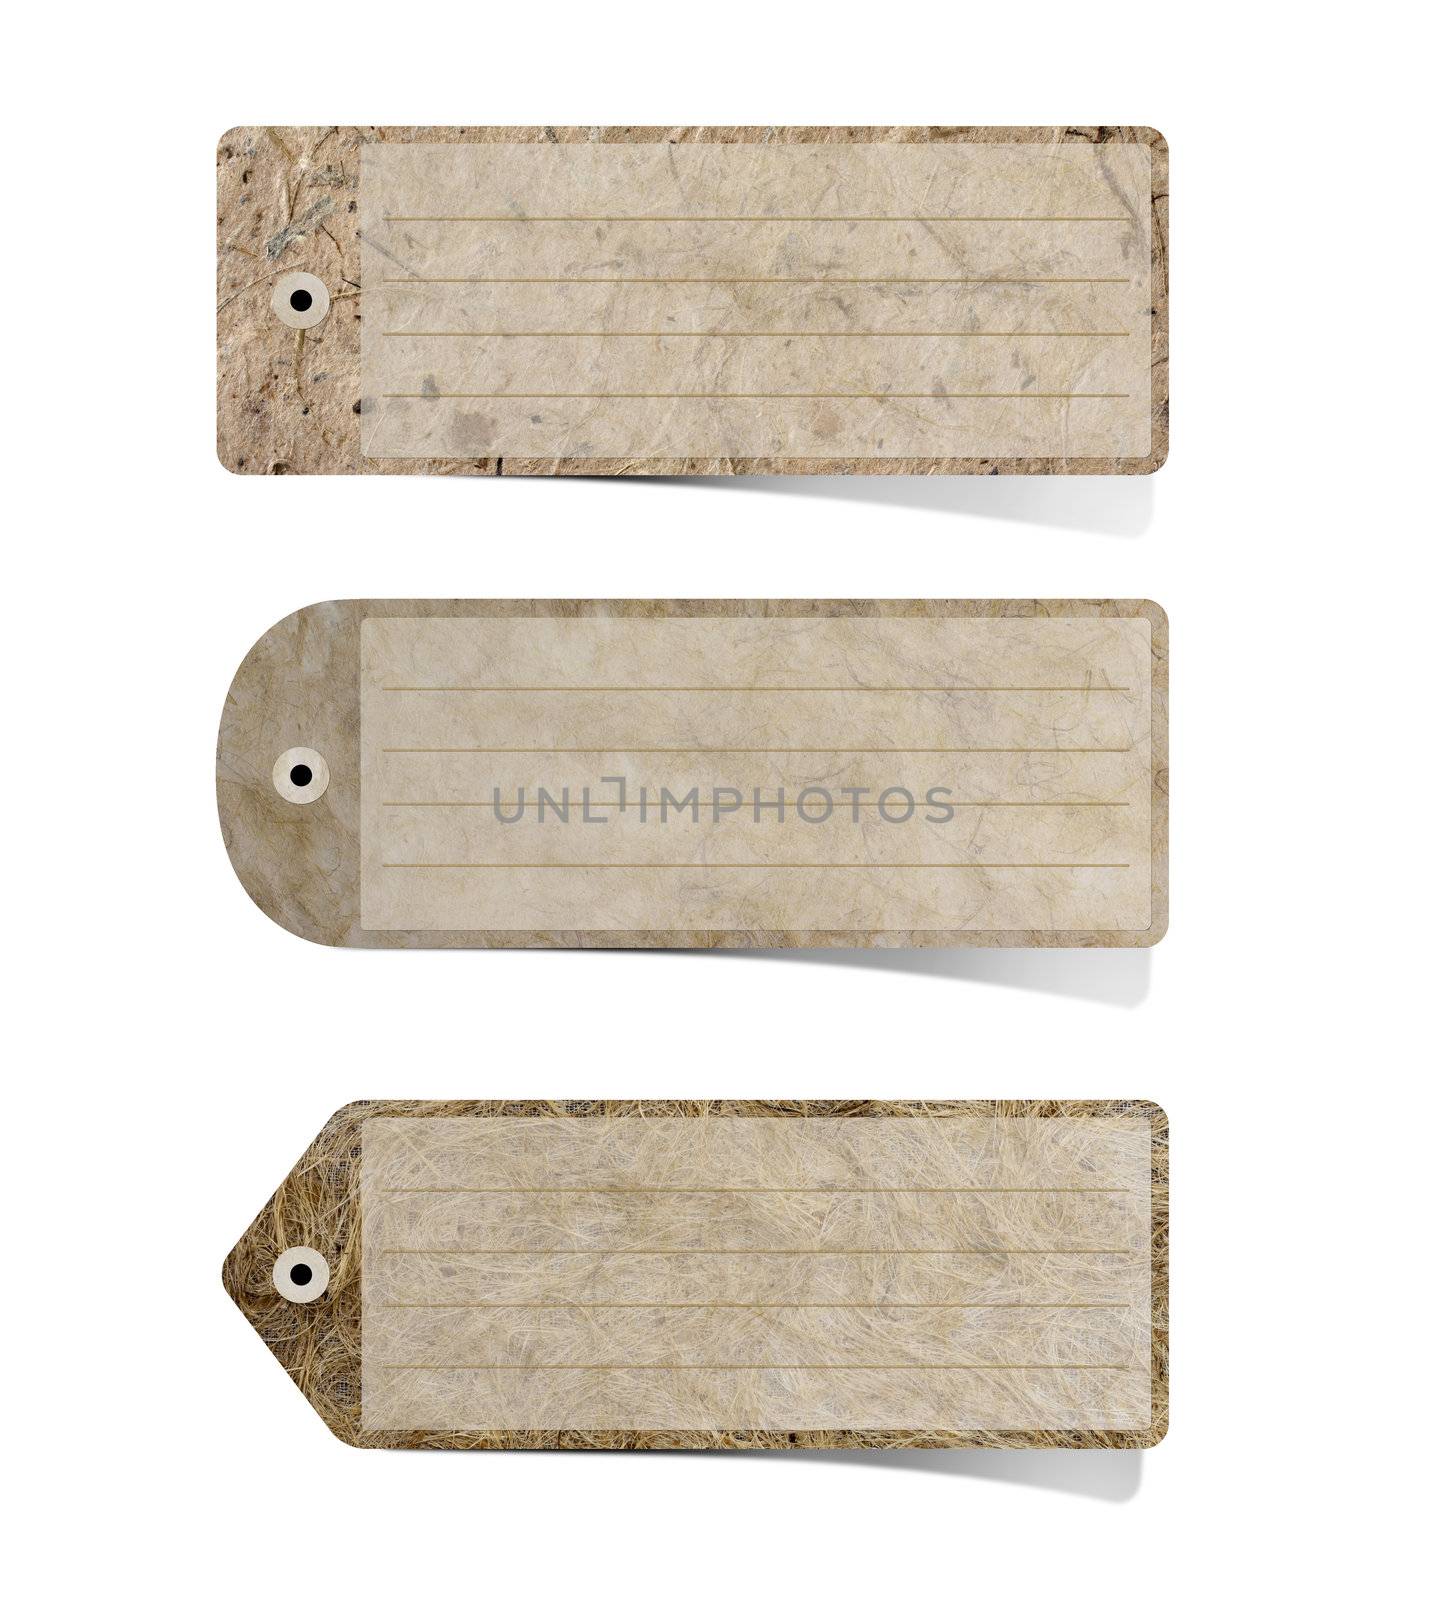 Mulberry paper Labels on white background. 

